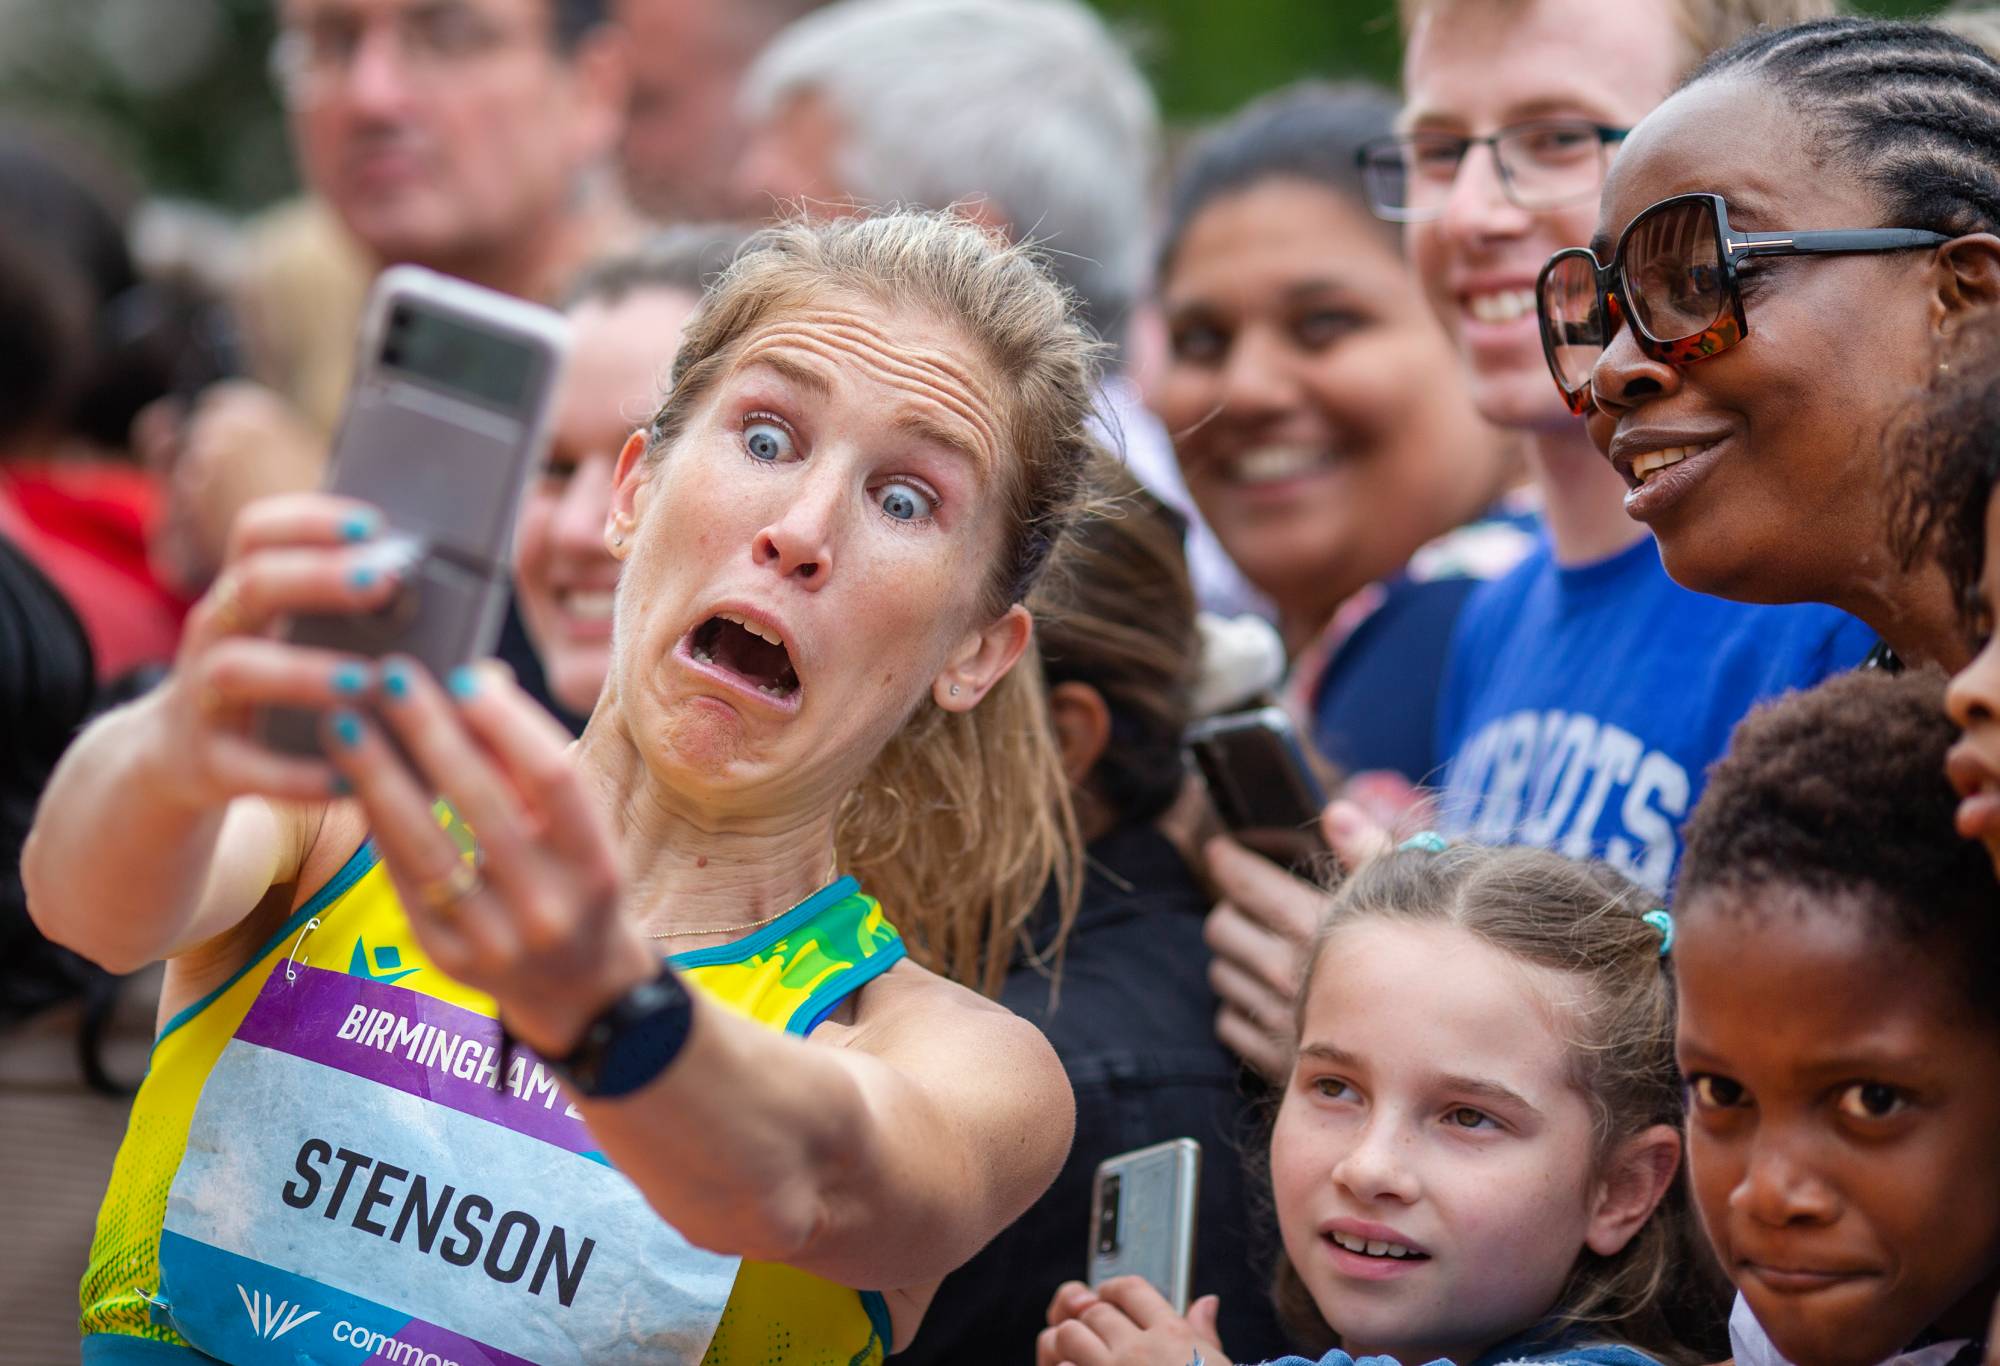 Jessica Stenson of Australia reacts as she takes selfies with spectators after winning the gold medal during the Women's Marathon at the Birmingham 2022 Commonwealth Games at Victoria Square, Birmingham City Centre on July 30, 2022, in Birmingham, England. (Photo by Tim Clayton/Corbis via Getty Images)